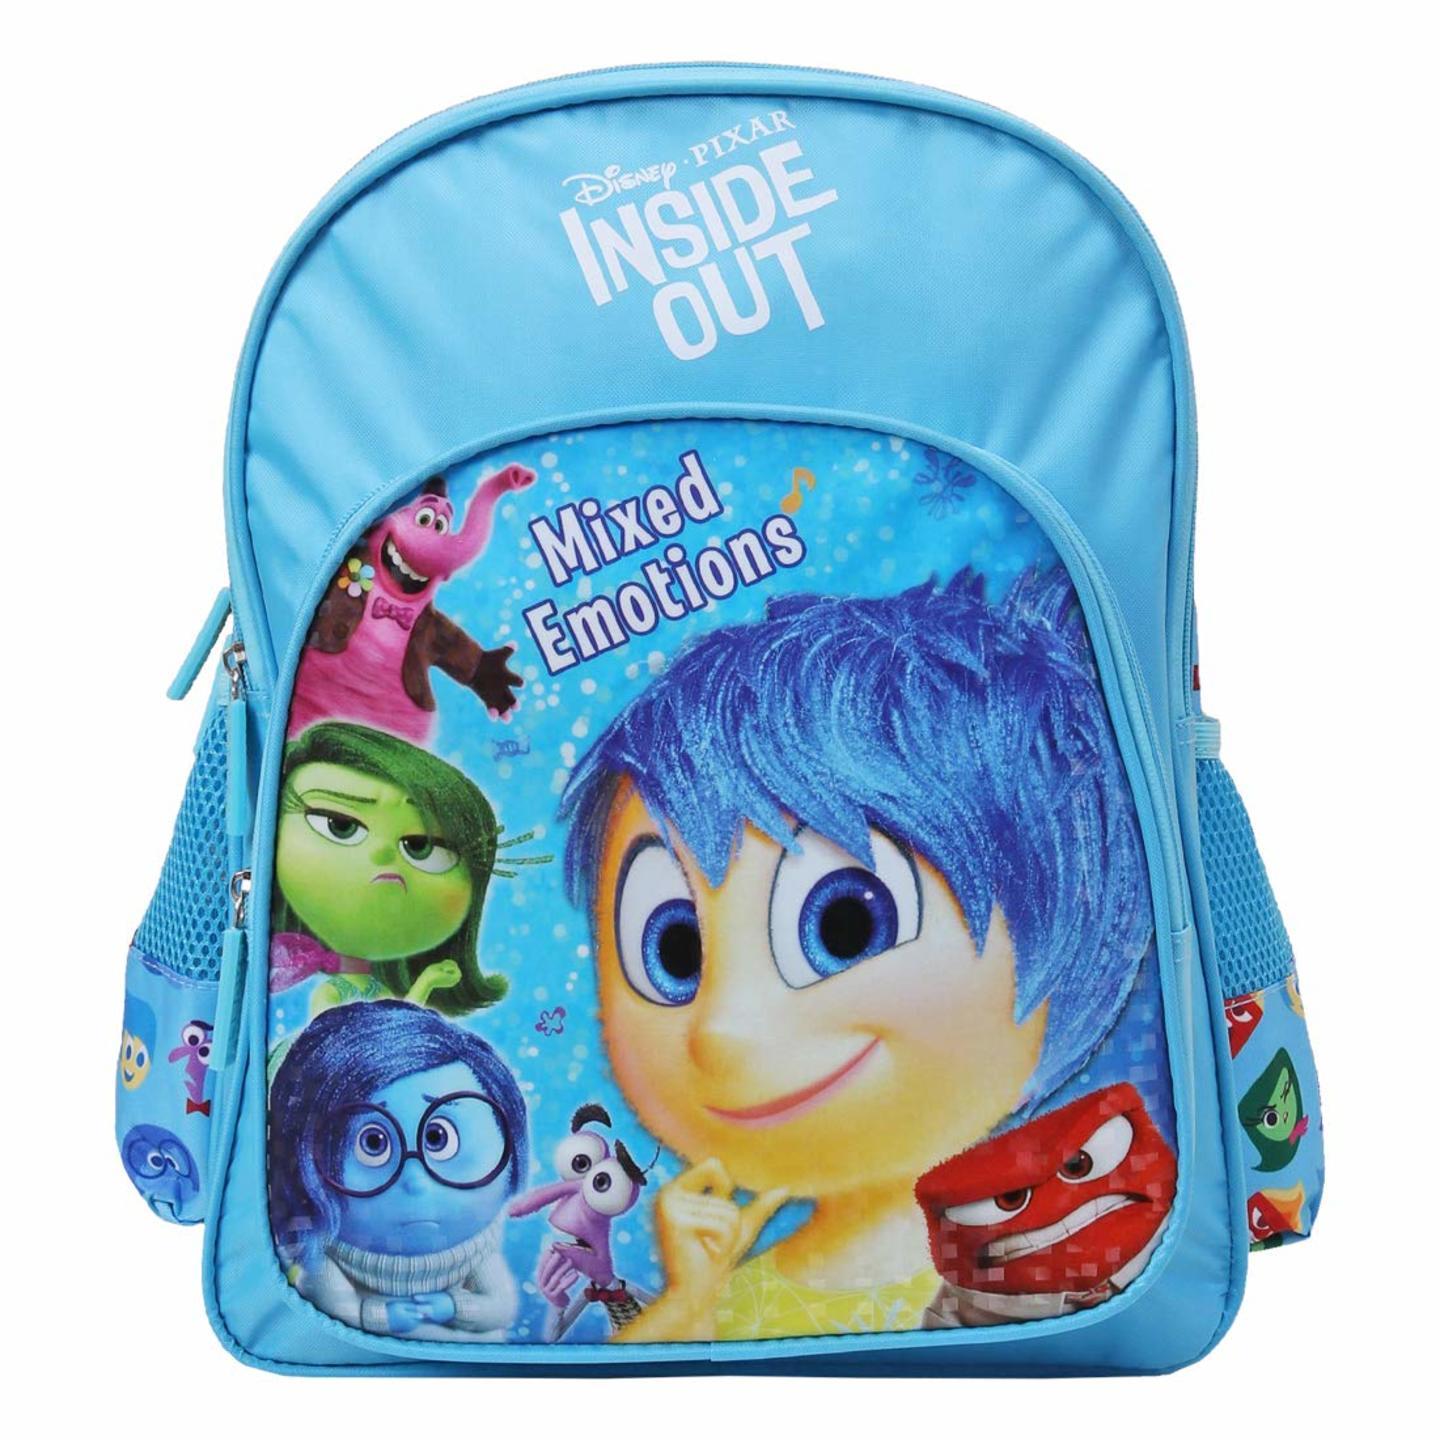 Inside Out Mixed Emotions School Bag